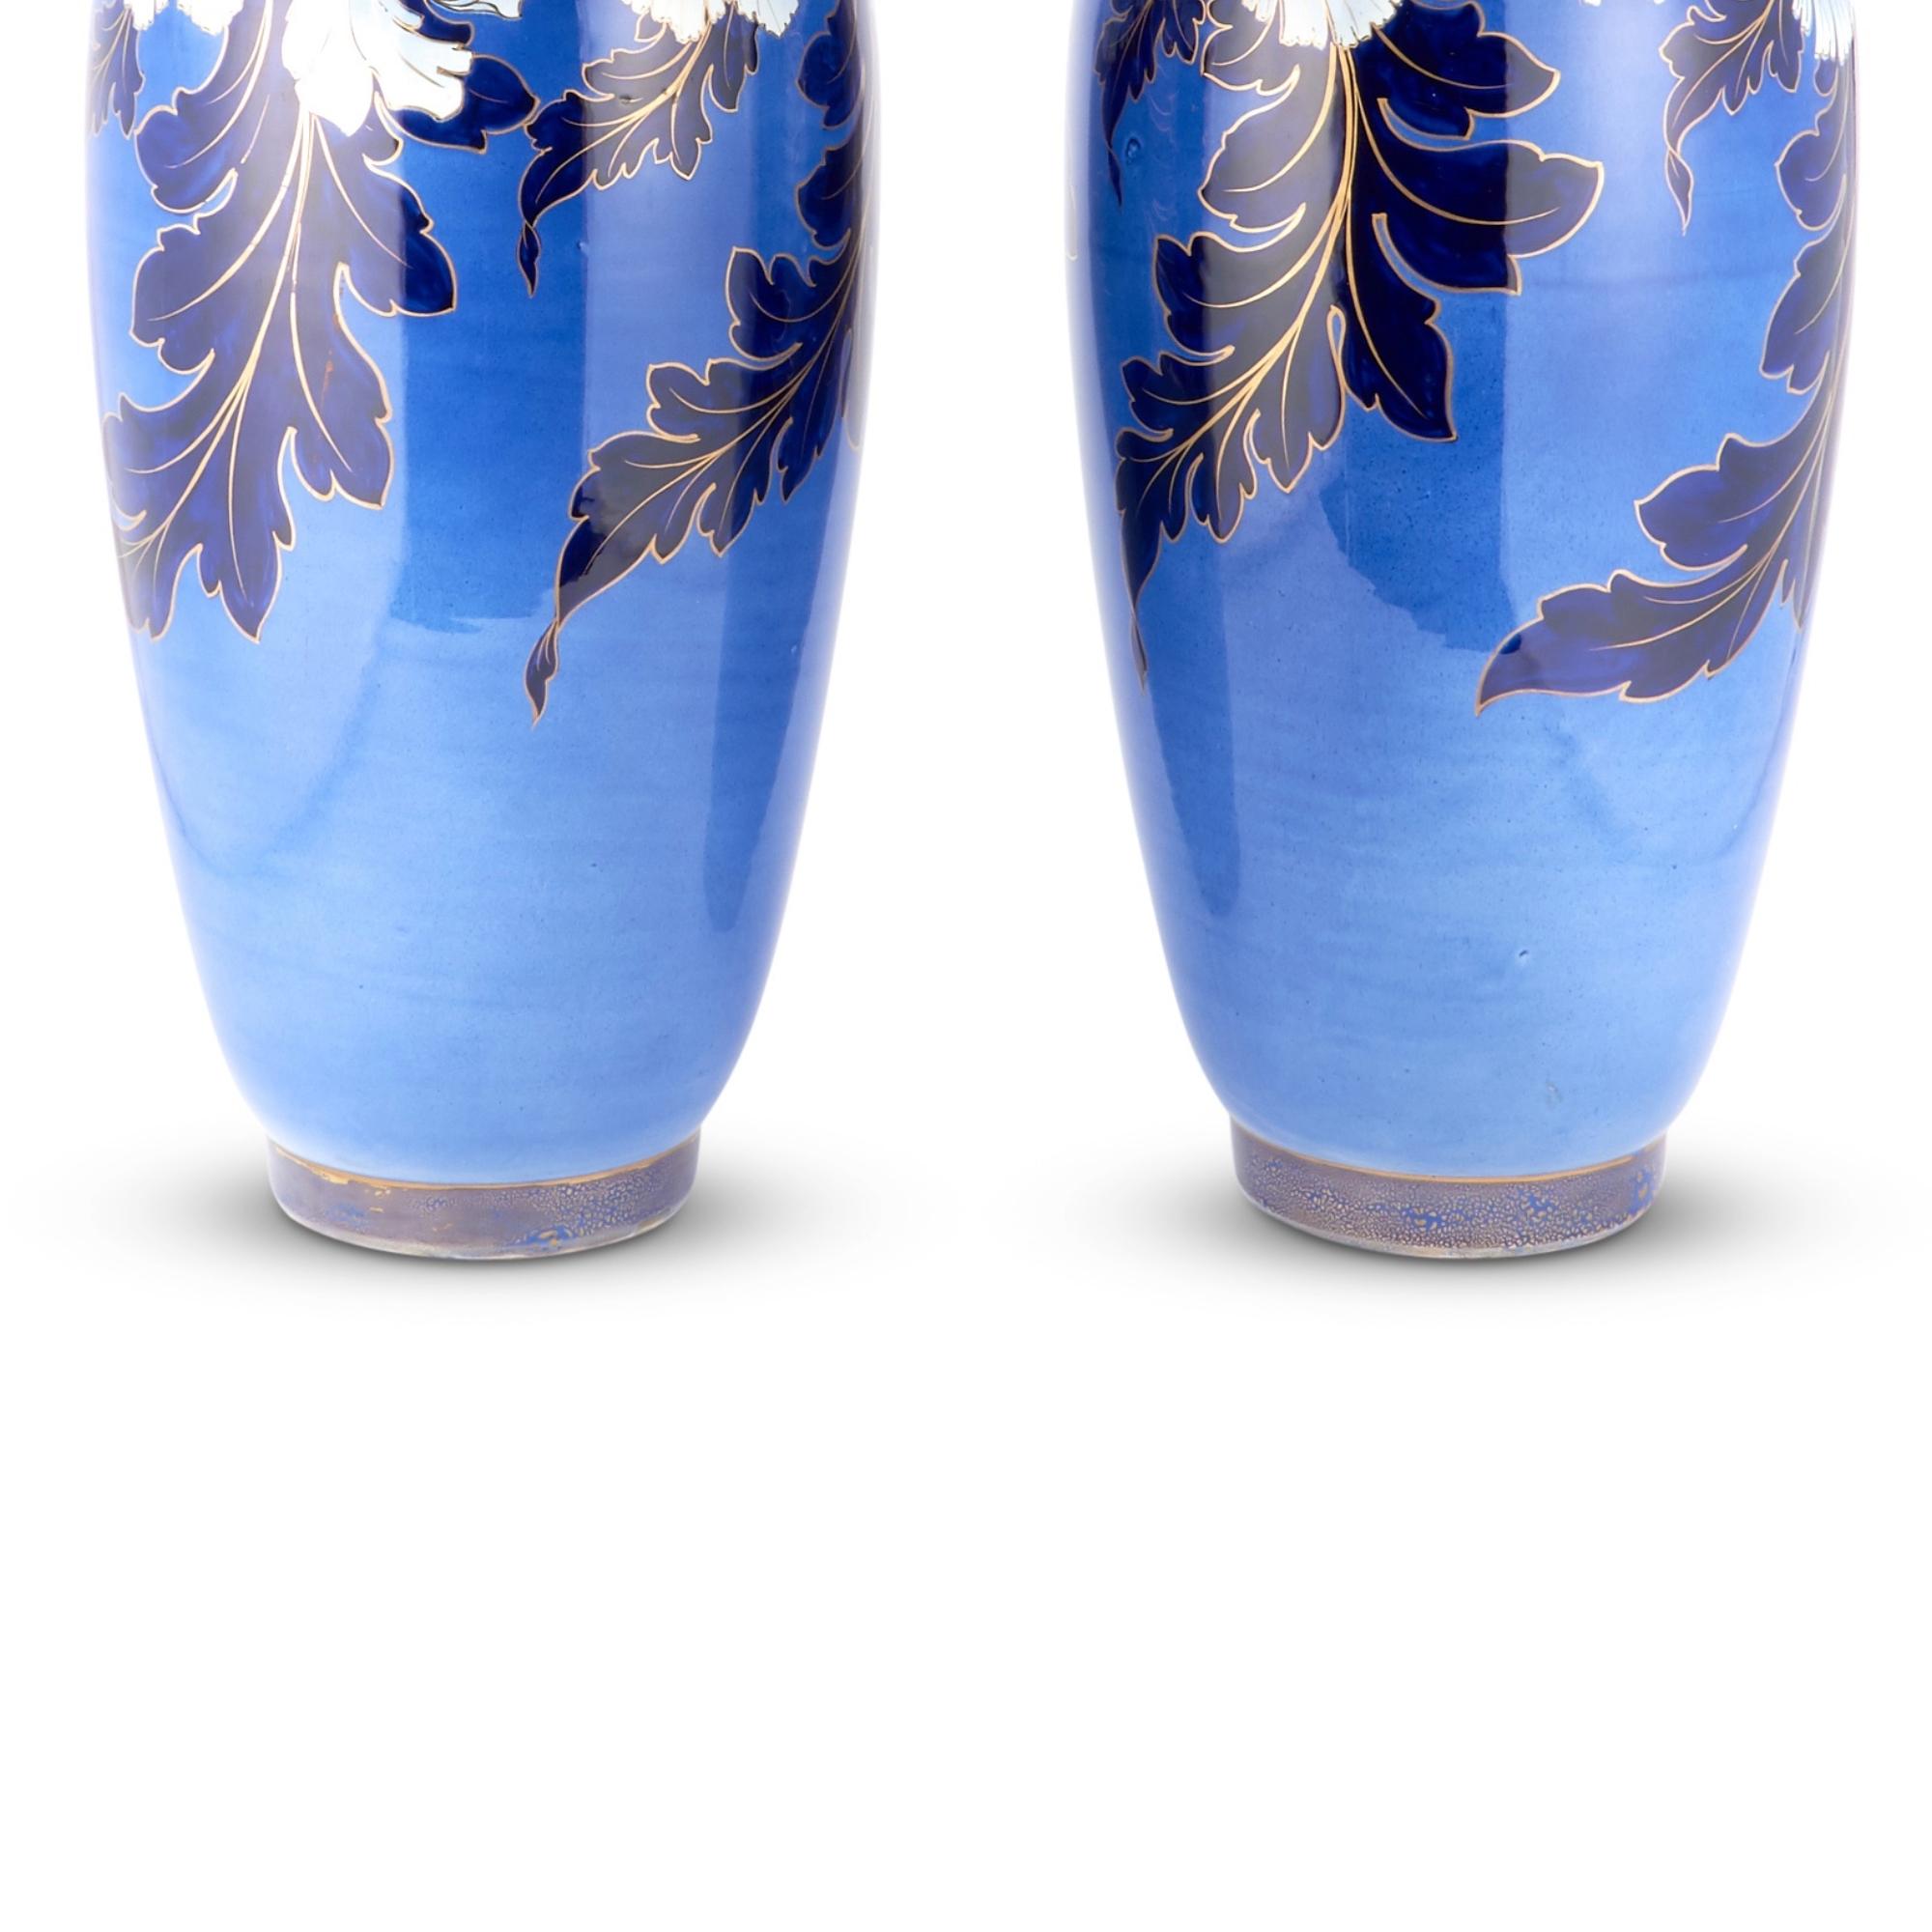 19th Century Large Art Nouveau Style Hand-Painted & Gilt Decorated Vases / Urns For Sale 1